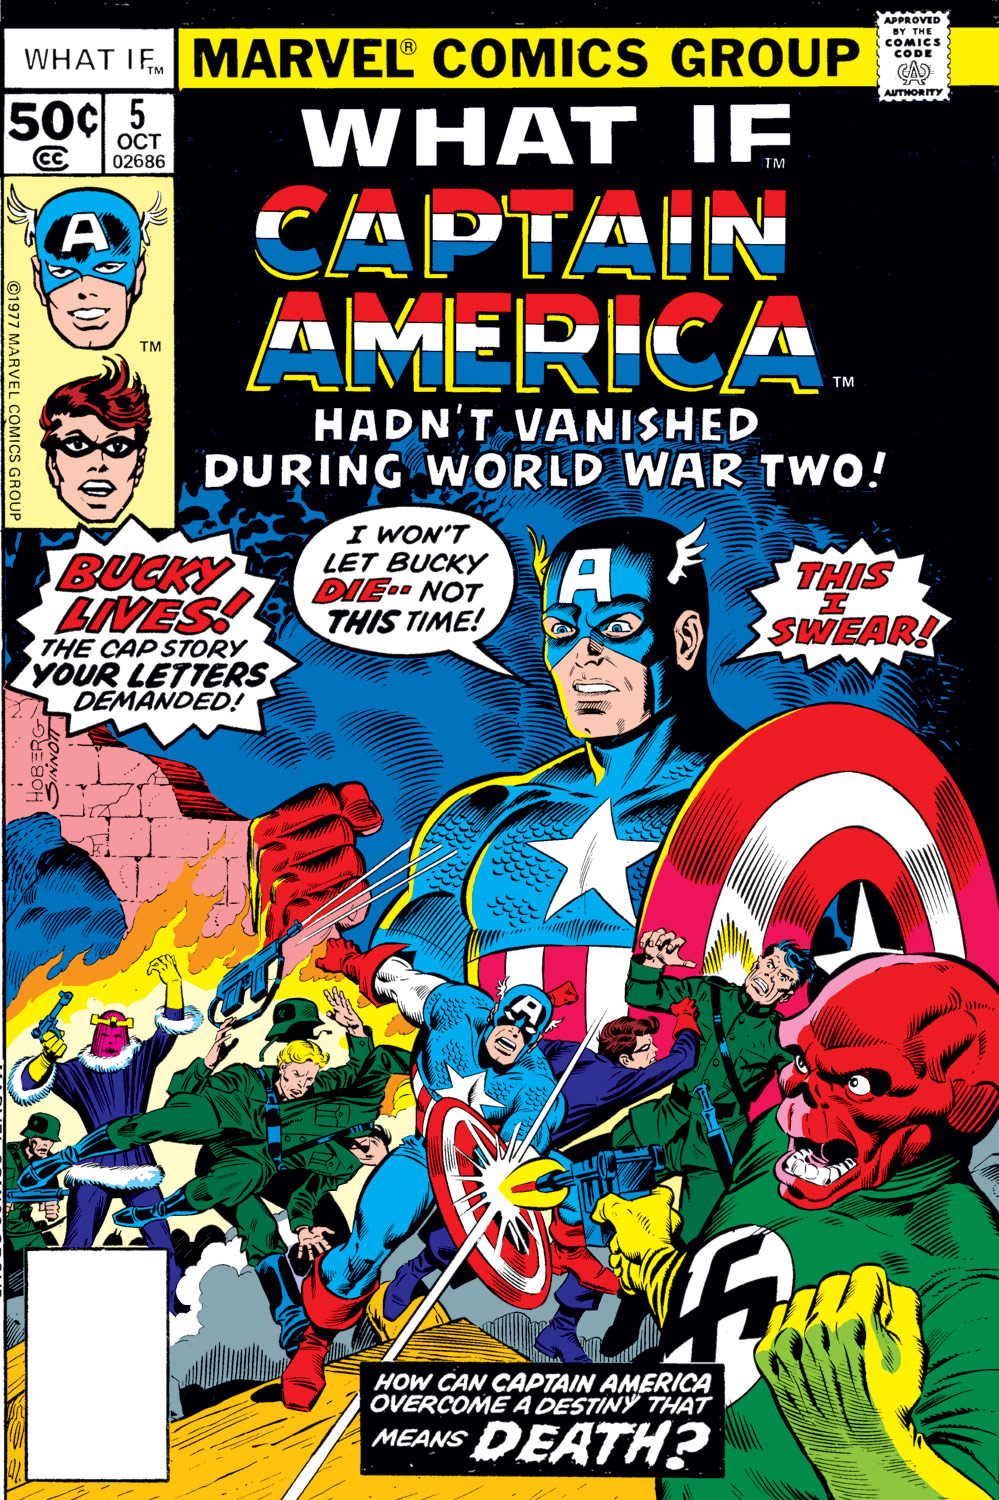 What If? (1977) Issue #5 - Captain America hadn't vanished during World War Two #5 - English 1